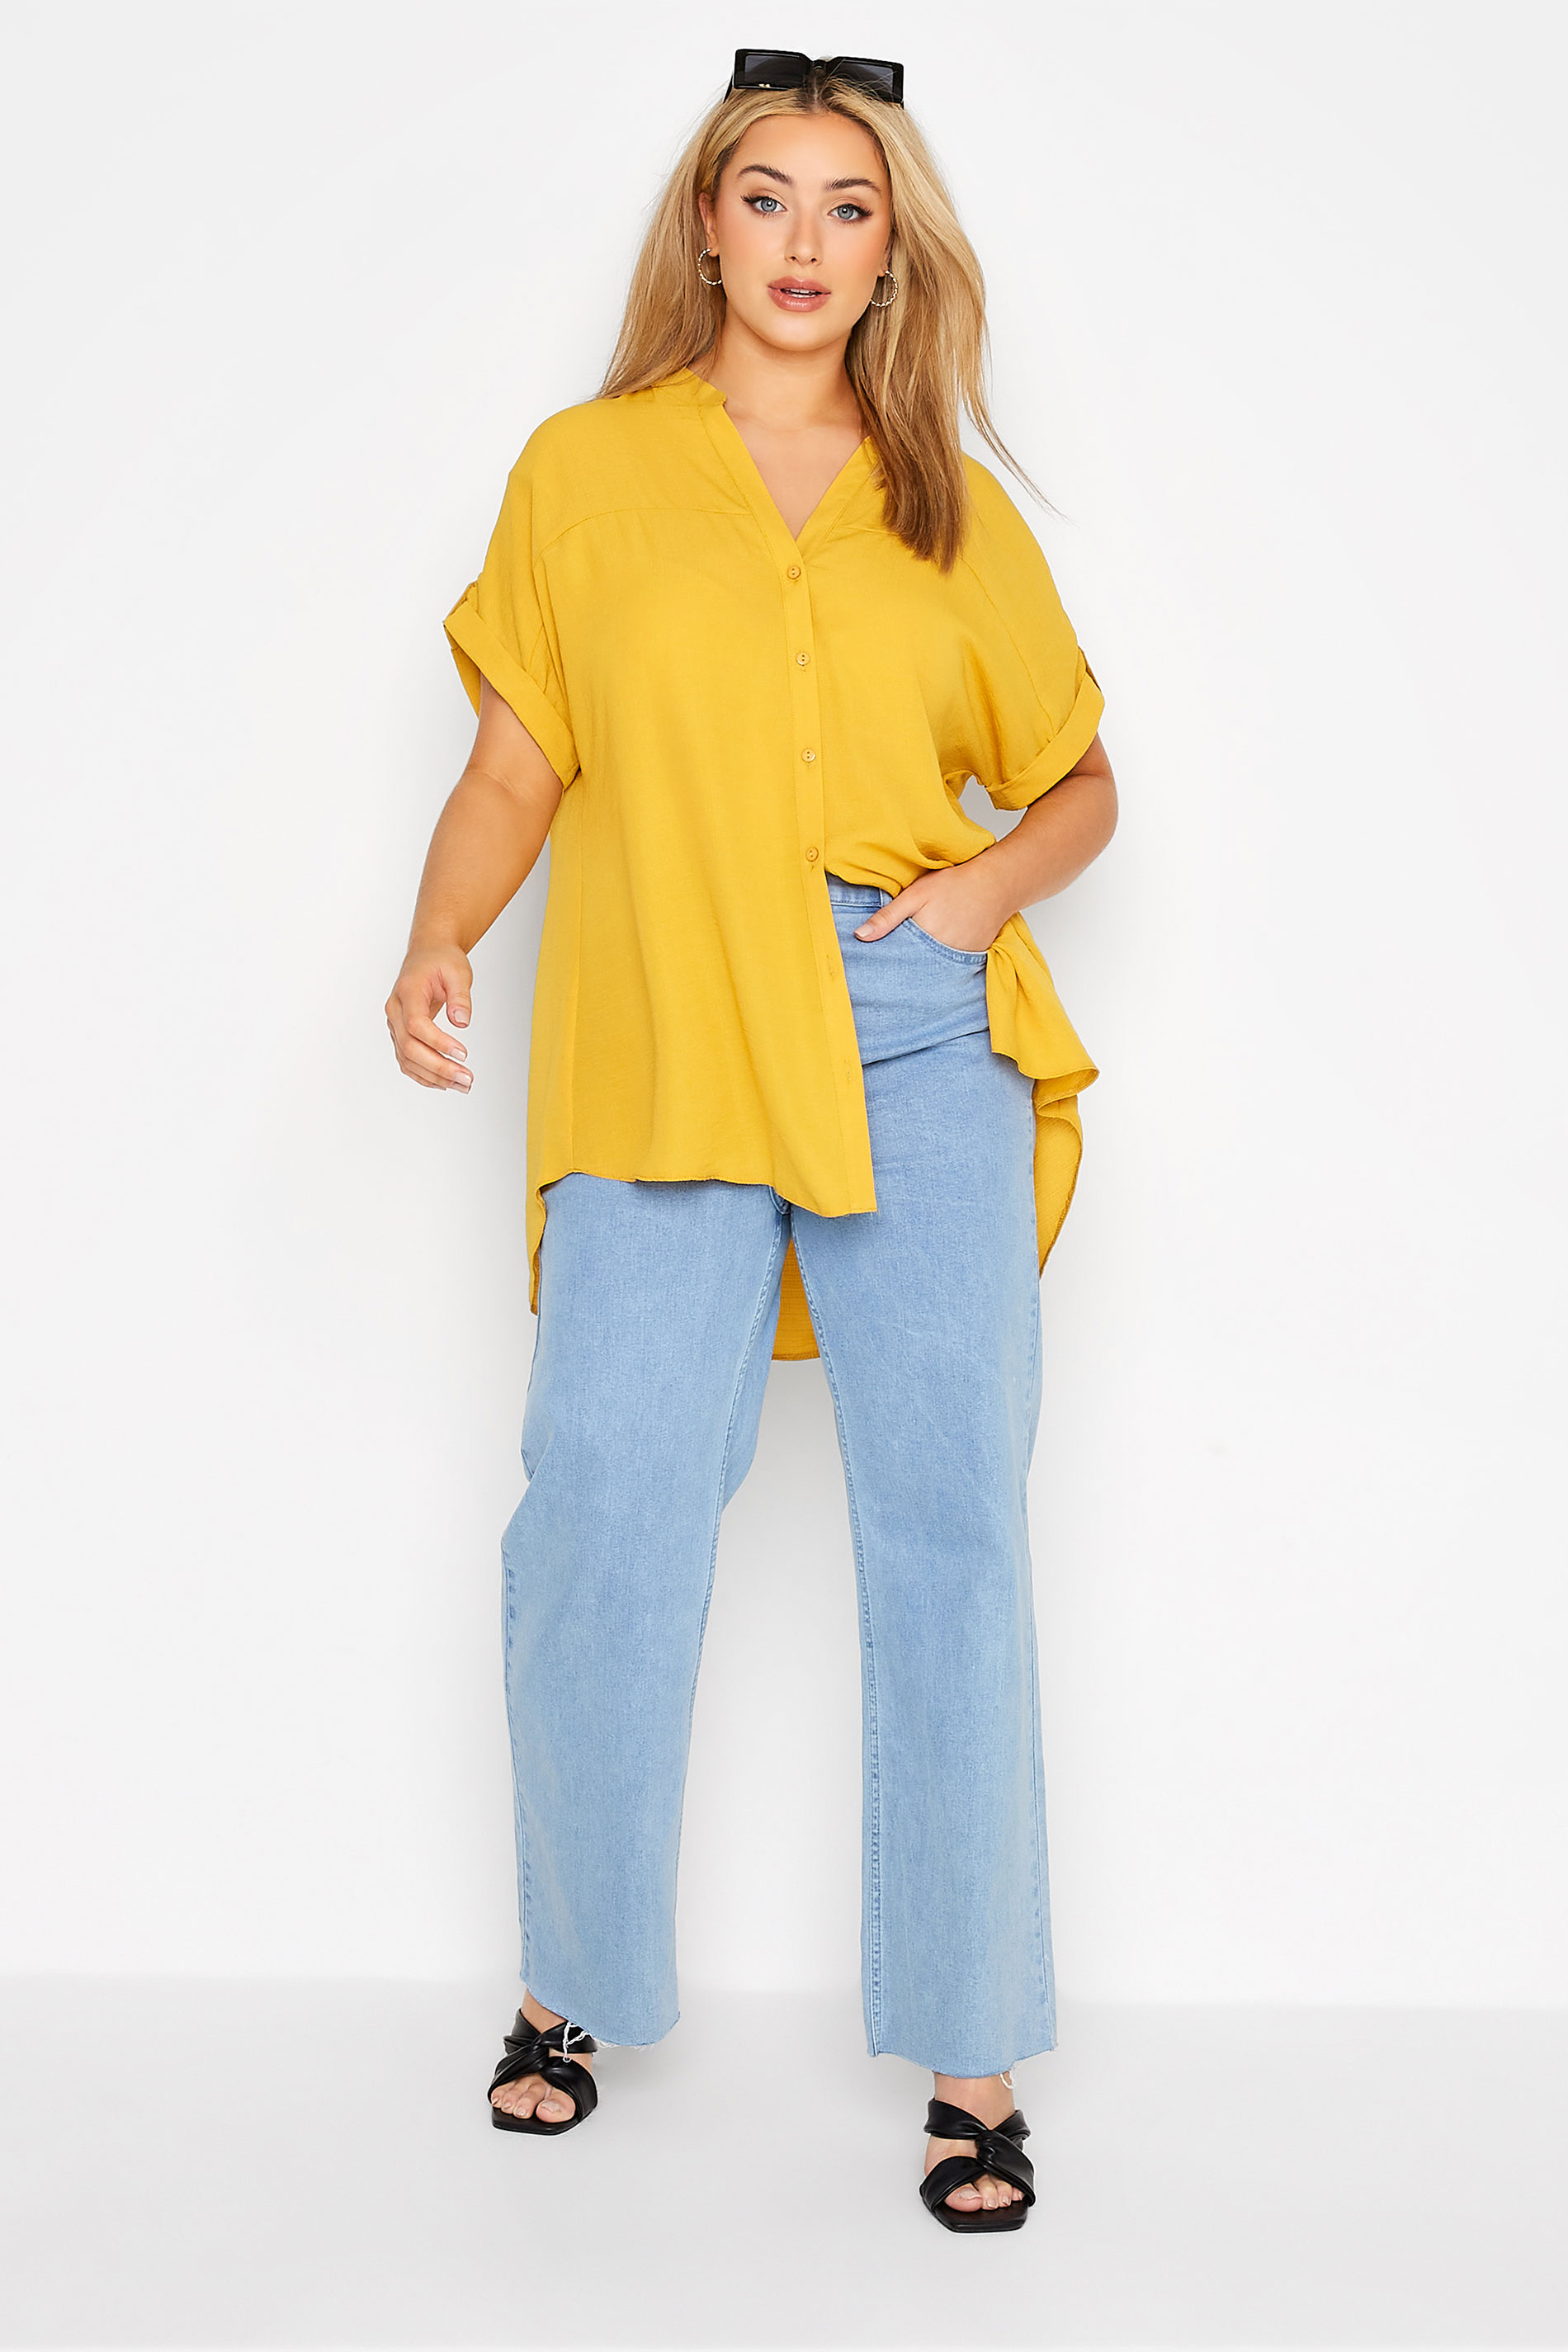 Grande taille  Tops Grande taille  Blouses & Chemisiers | Chemisier Jaune Moutarde Manches Courtes - WC23803